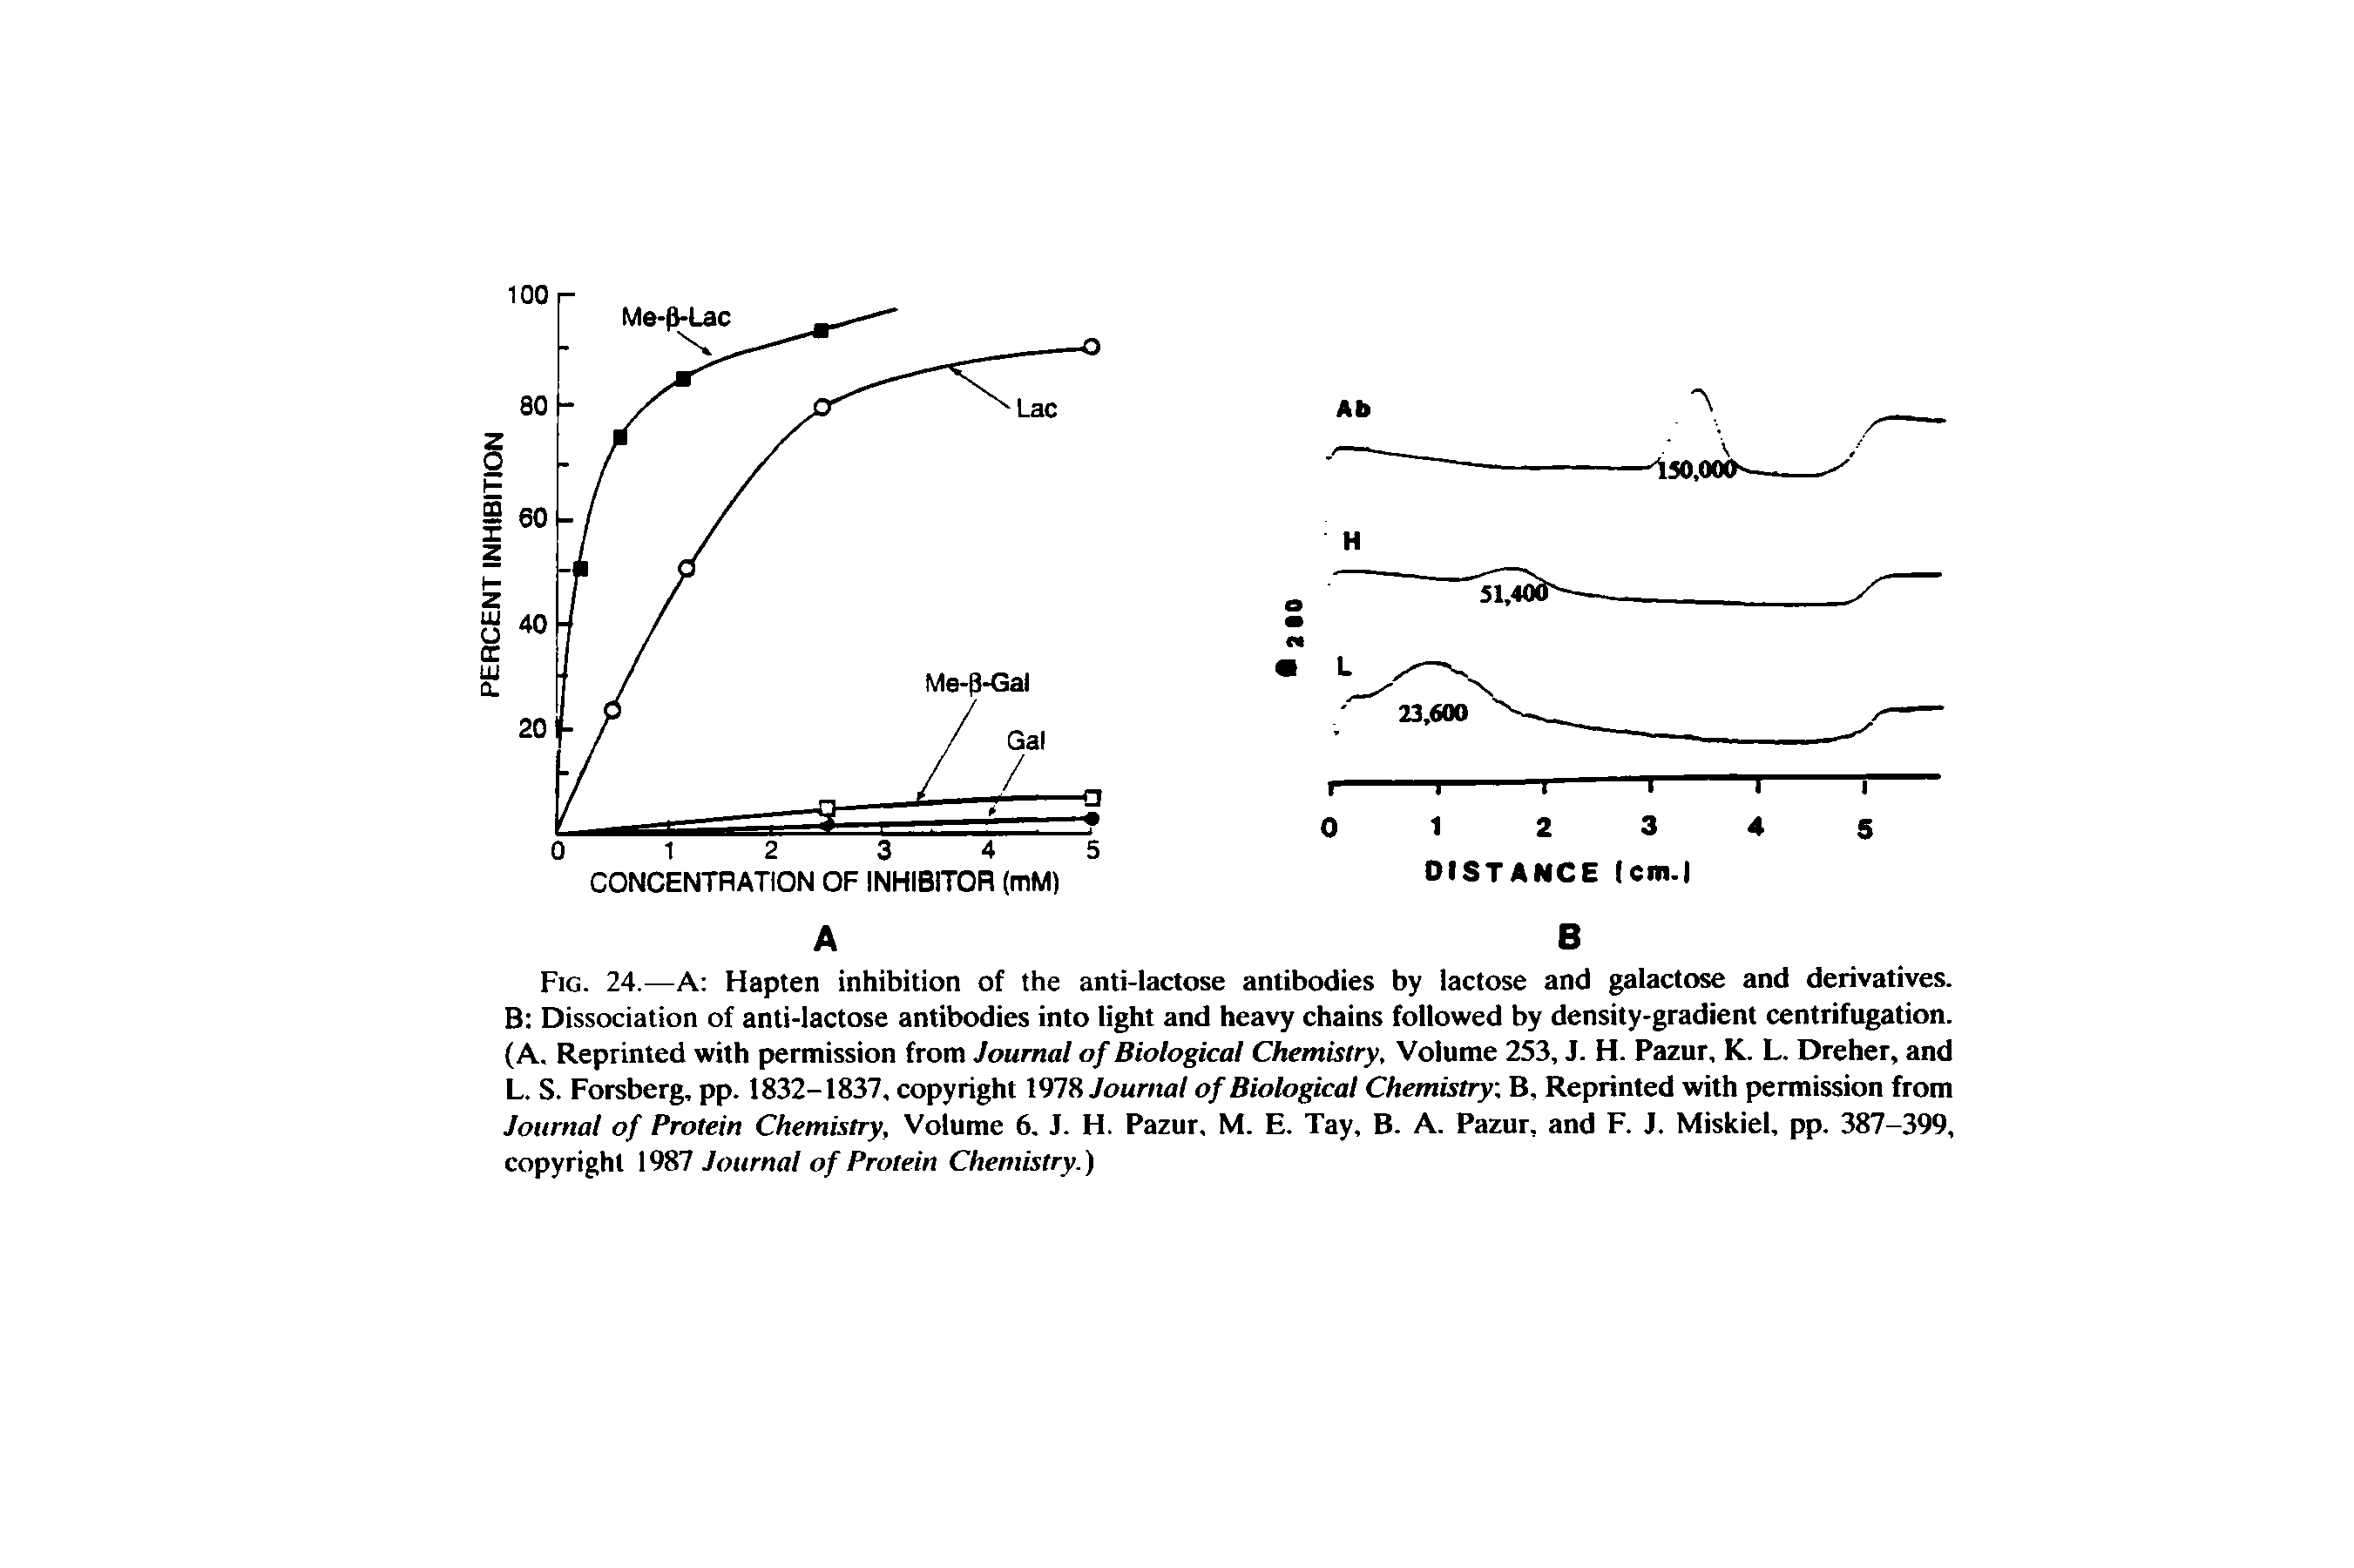 Fig. 24.—A Hapten inhibition of the anti-lactose antibodies by lactose and galactose and derivatives. B Dissociation of anti-lactose antibodies into light and heavy chains followed by density-gradient centrifugation. (A. Reprinted with permission from Journal of Biological Chemistry, Volume 253, J. H. Pazur, K. L. Dreher, and L. S. Forsberg, pp. 1832-1837, copyright 1978 Journal of Biological Chemistry B, Reprinted with permission from Journal of Protein Chemistry, Volume 6. J. H. Pazur, M. E. Tay, B. A. Pazur, and F. J. Miskiel, pp. 387-399, copyright 1987 Journal of Protein Chemistry.)...